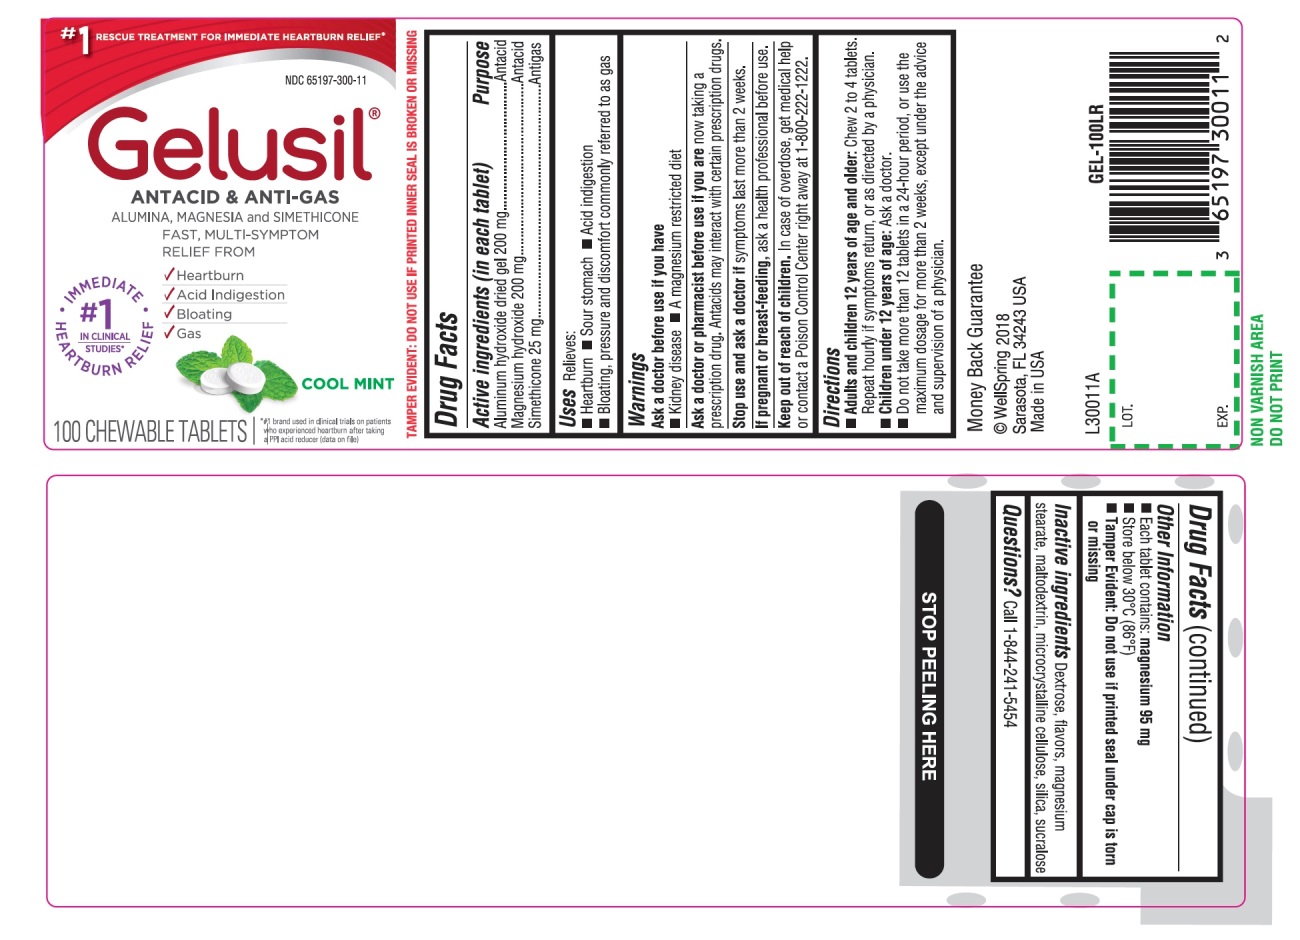 Gelusil Antacid Antigas Cool mint 100 Chewable Tablets